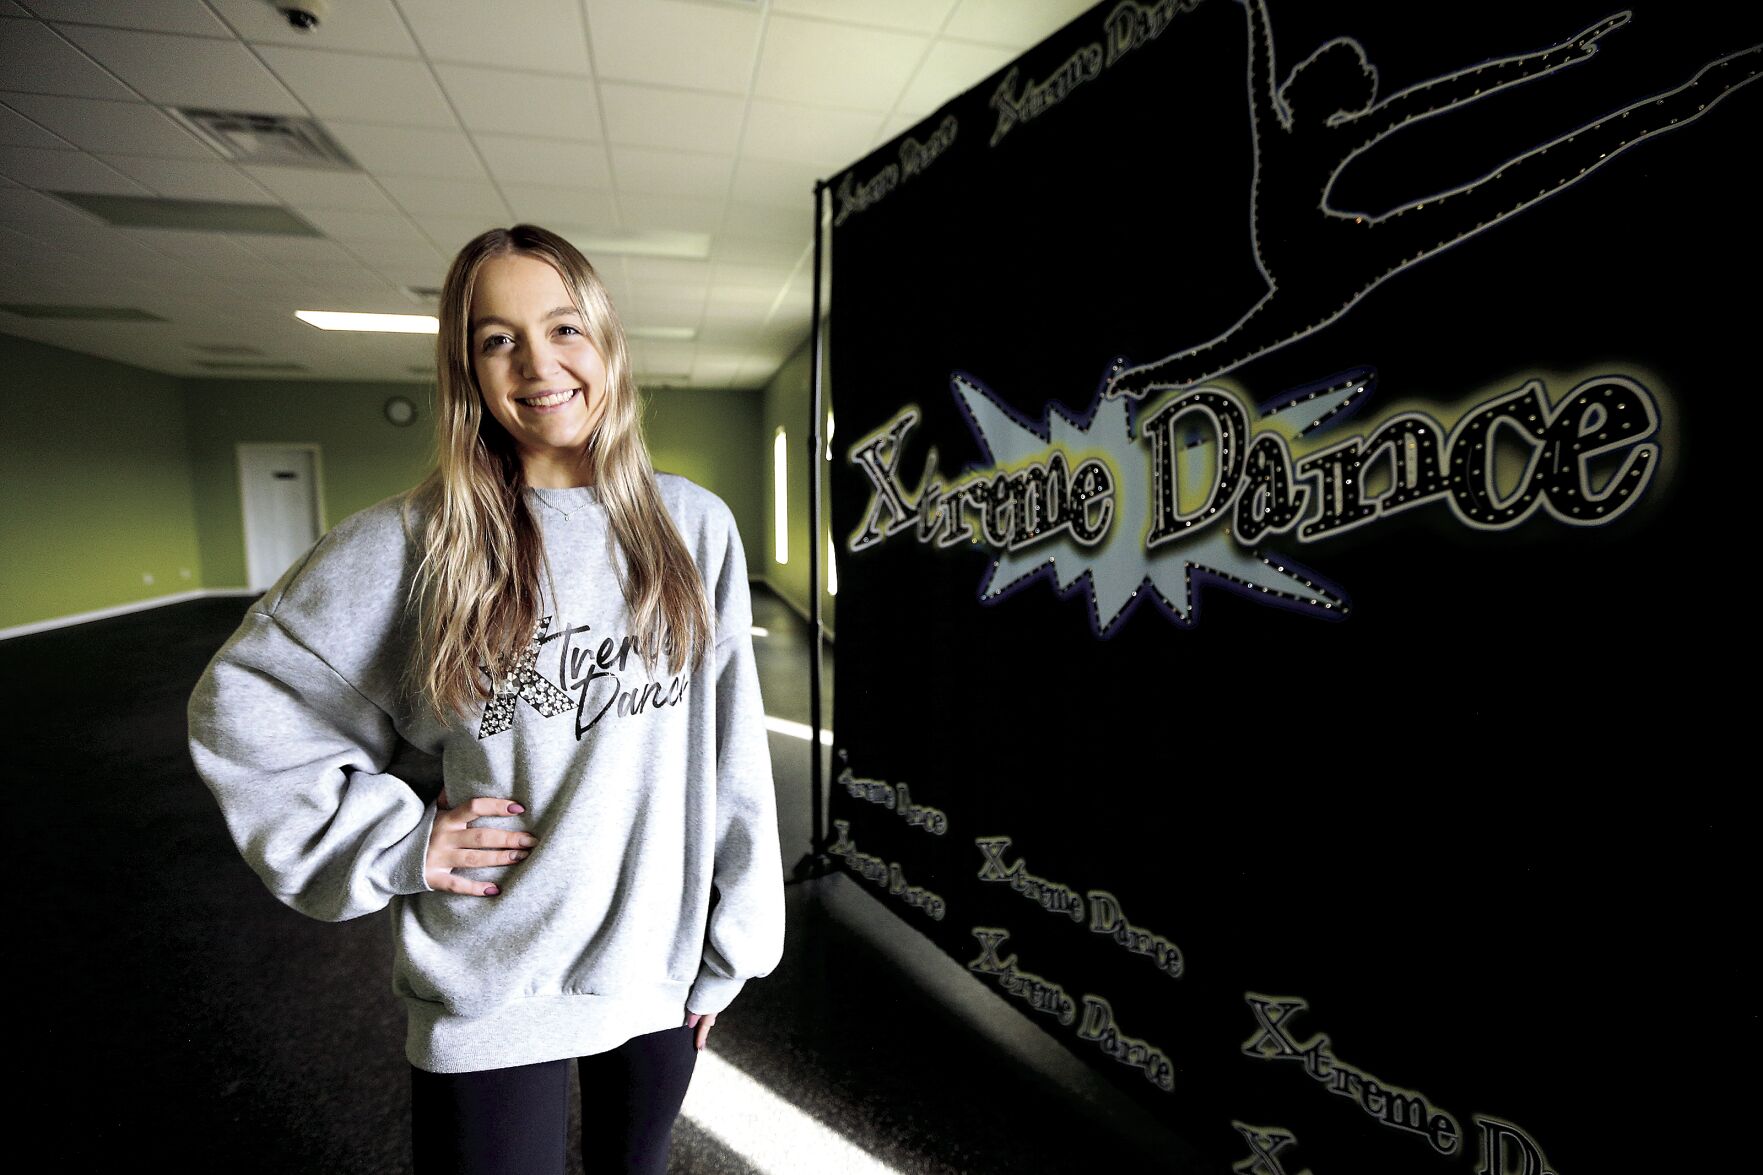 Kylie Goedken is the owner of Xtreme Dance Cascade.    PHOTO CREDIT: Dave Kettering